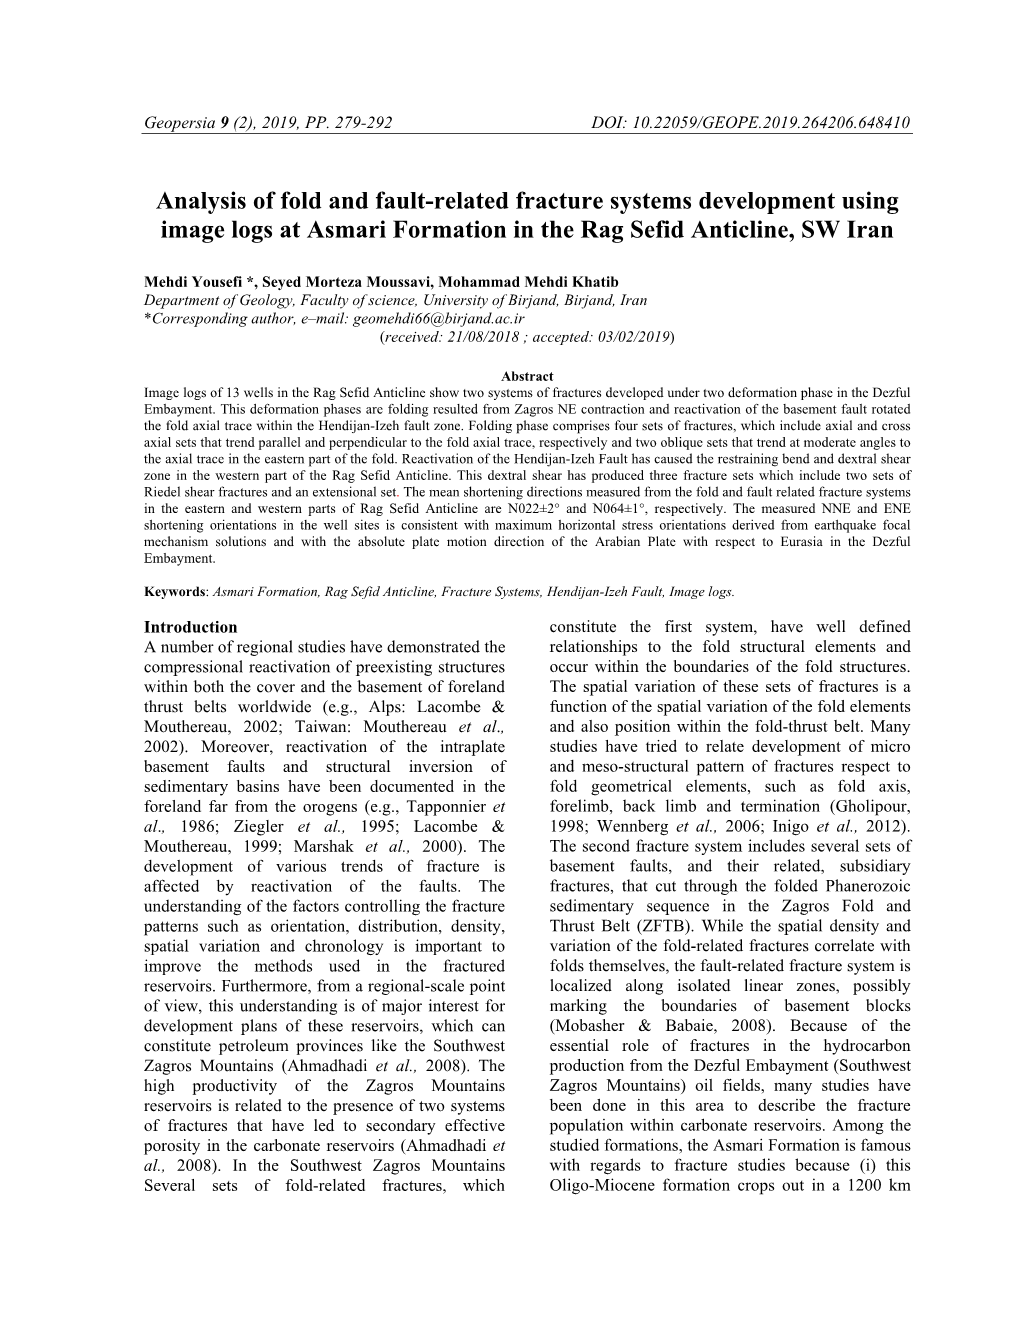 Analysis of Fold and Fault-Related Fracture Systems Development Using Image Logs at Asmari Formation in the Rag Sefid Anticline, SW Iran